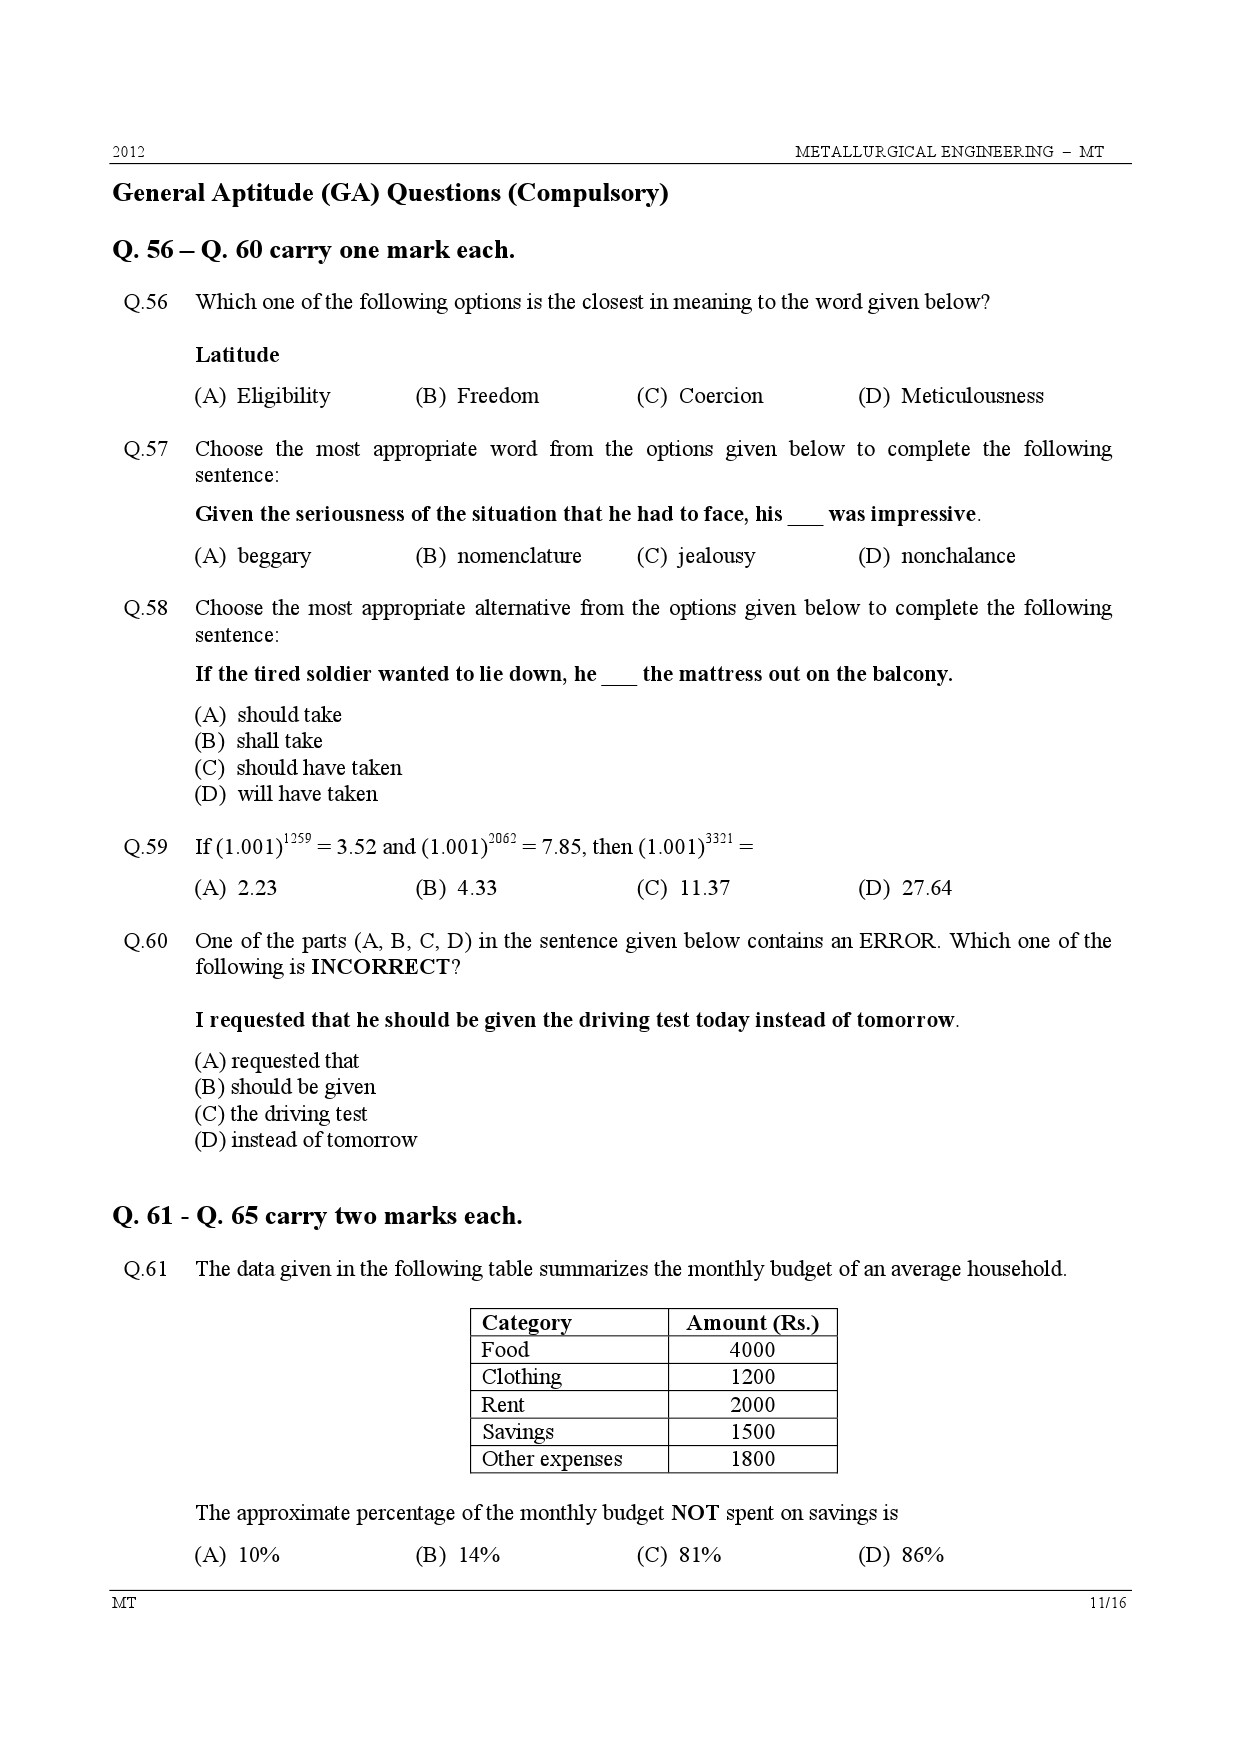 GATE Exam Question Paper 2012 Metallurgical Engineering 11